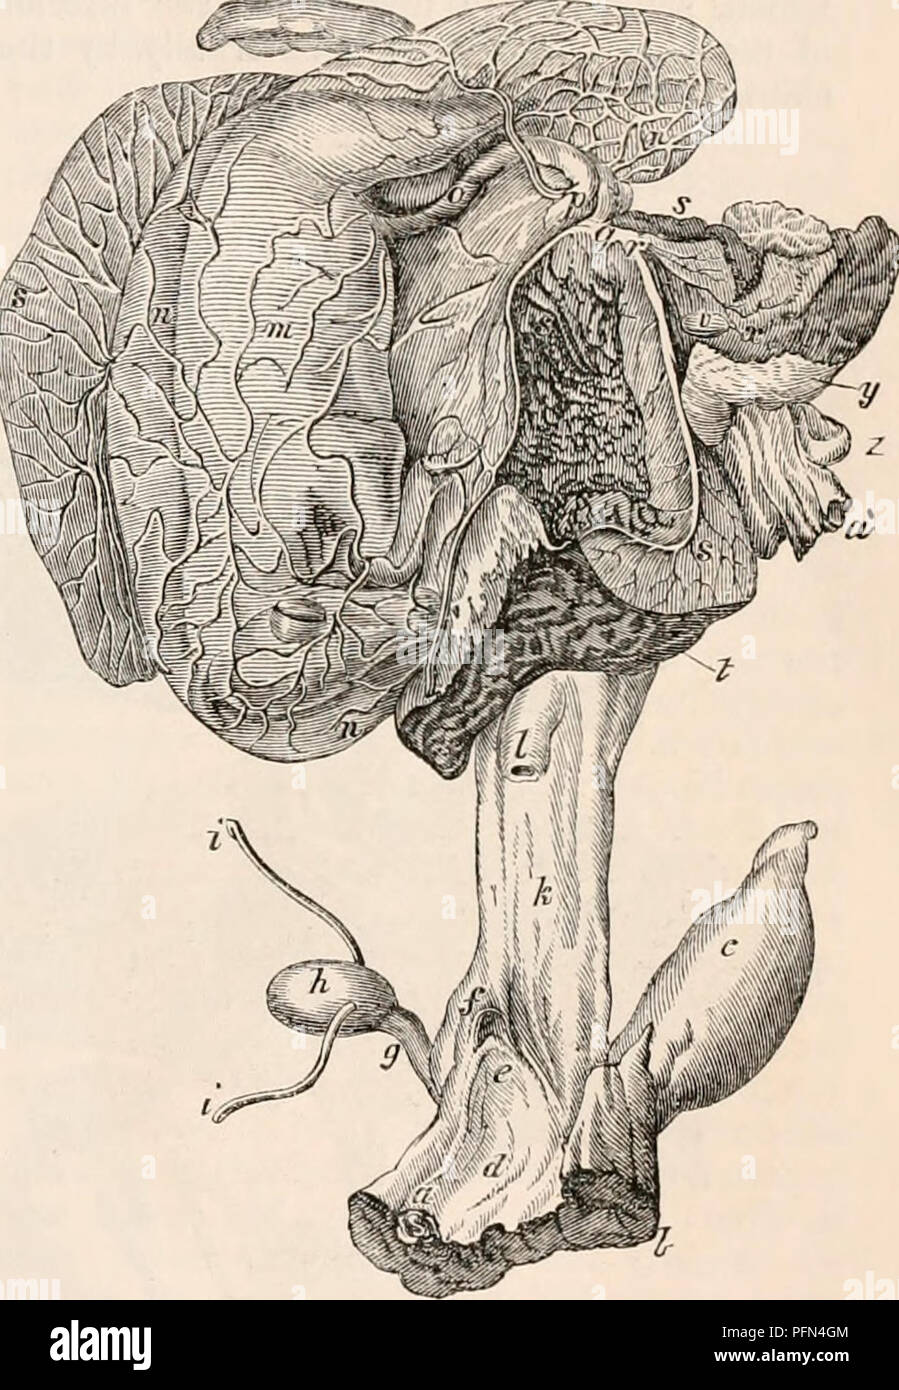 . The cyclopædia of anatomy and physiology. Anatomy; Physiology; Zoology. SOLIPEDA. 743 numerous small bundles. Arrived at the pos- terior extremity of the testes, the epididymus folds back upon itself, to constitute the vas deferens ; which, at its commencement, is very tortuous, and forms a protuberance of considerable size (/). The rasa deferentia (I, MI, w) are upwards of fourteen inches in length, and, during the greater part of their course, about two lines in diameter ; but to- wards their termination they become, for a length of about seven inches, much dilated, here measuring upwards  Stock Photo